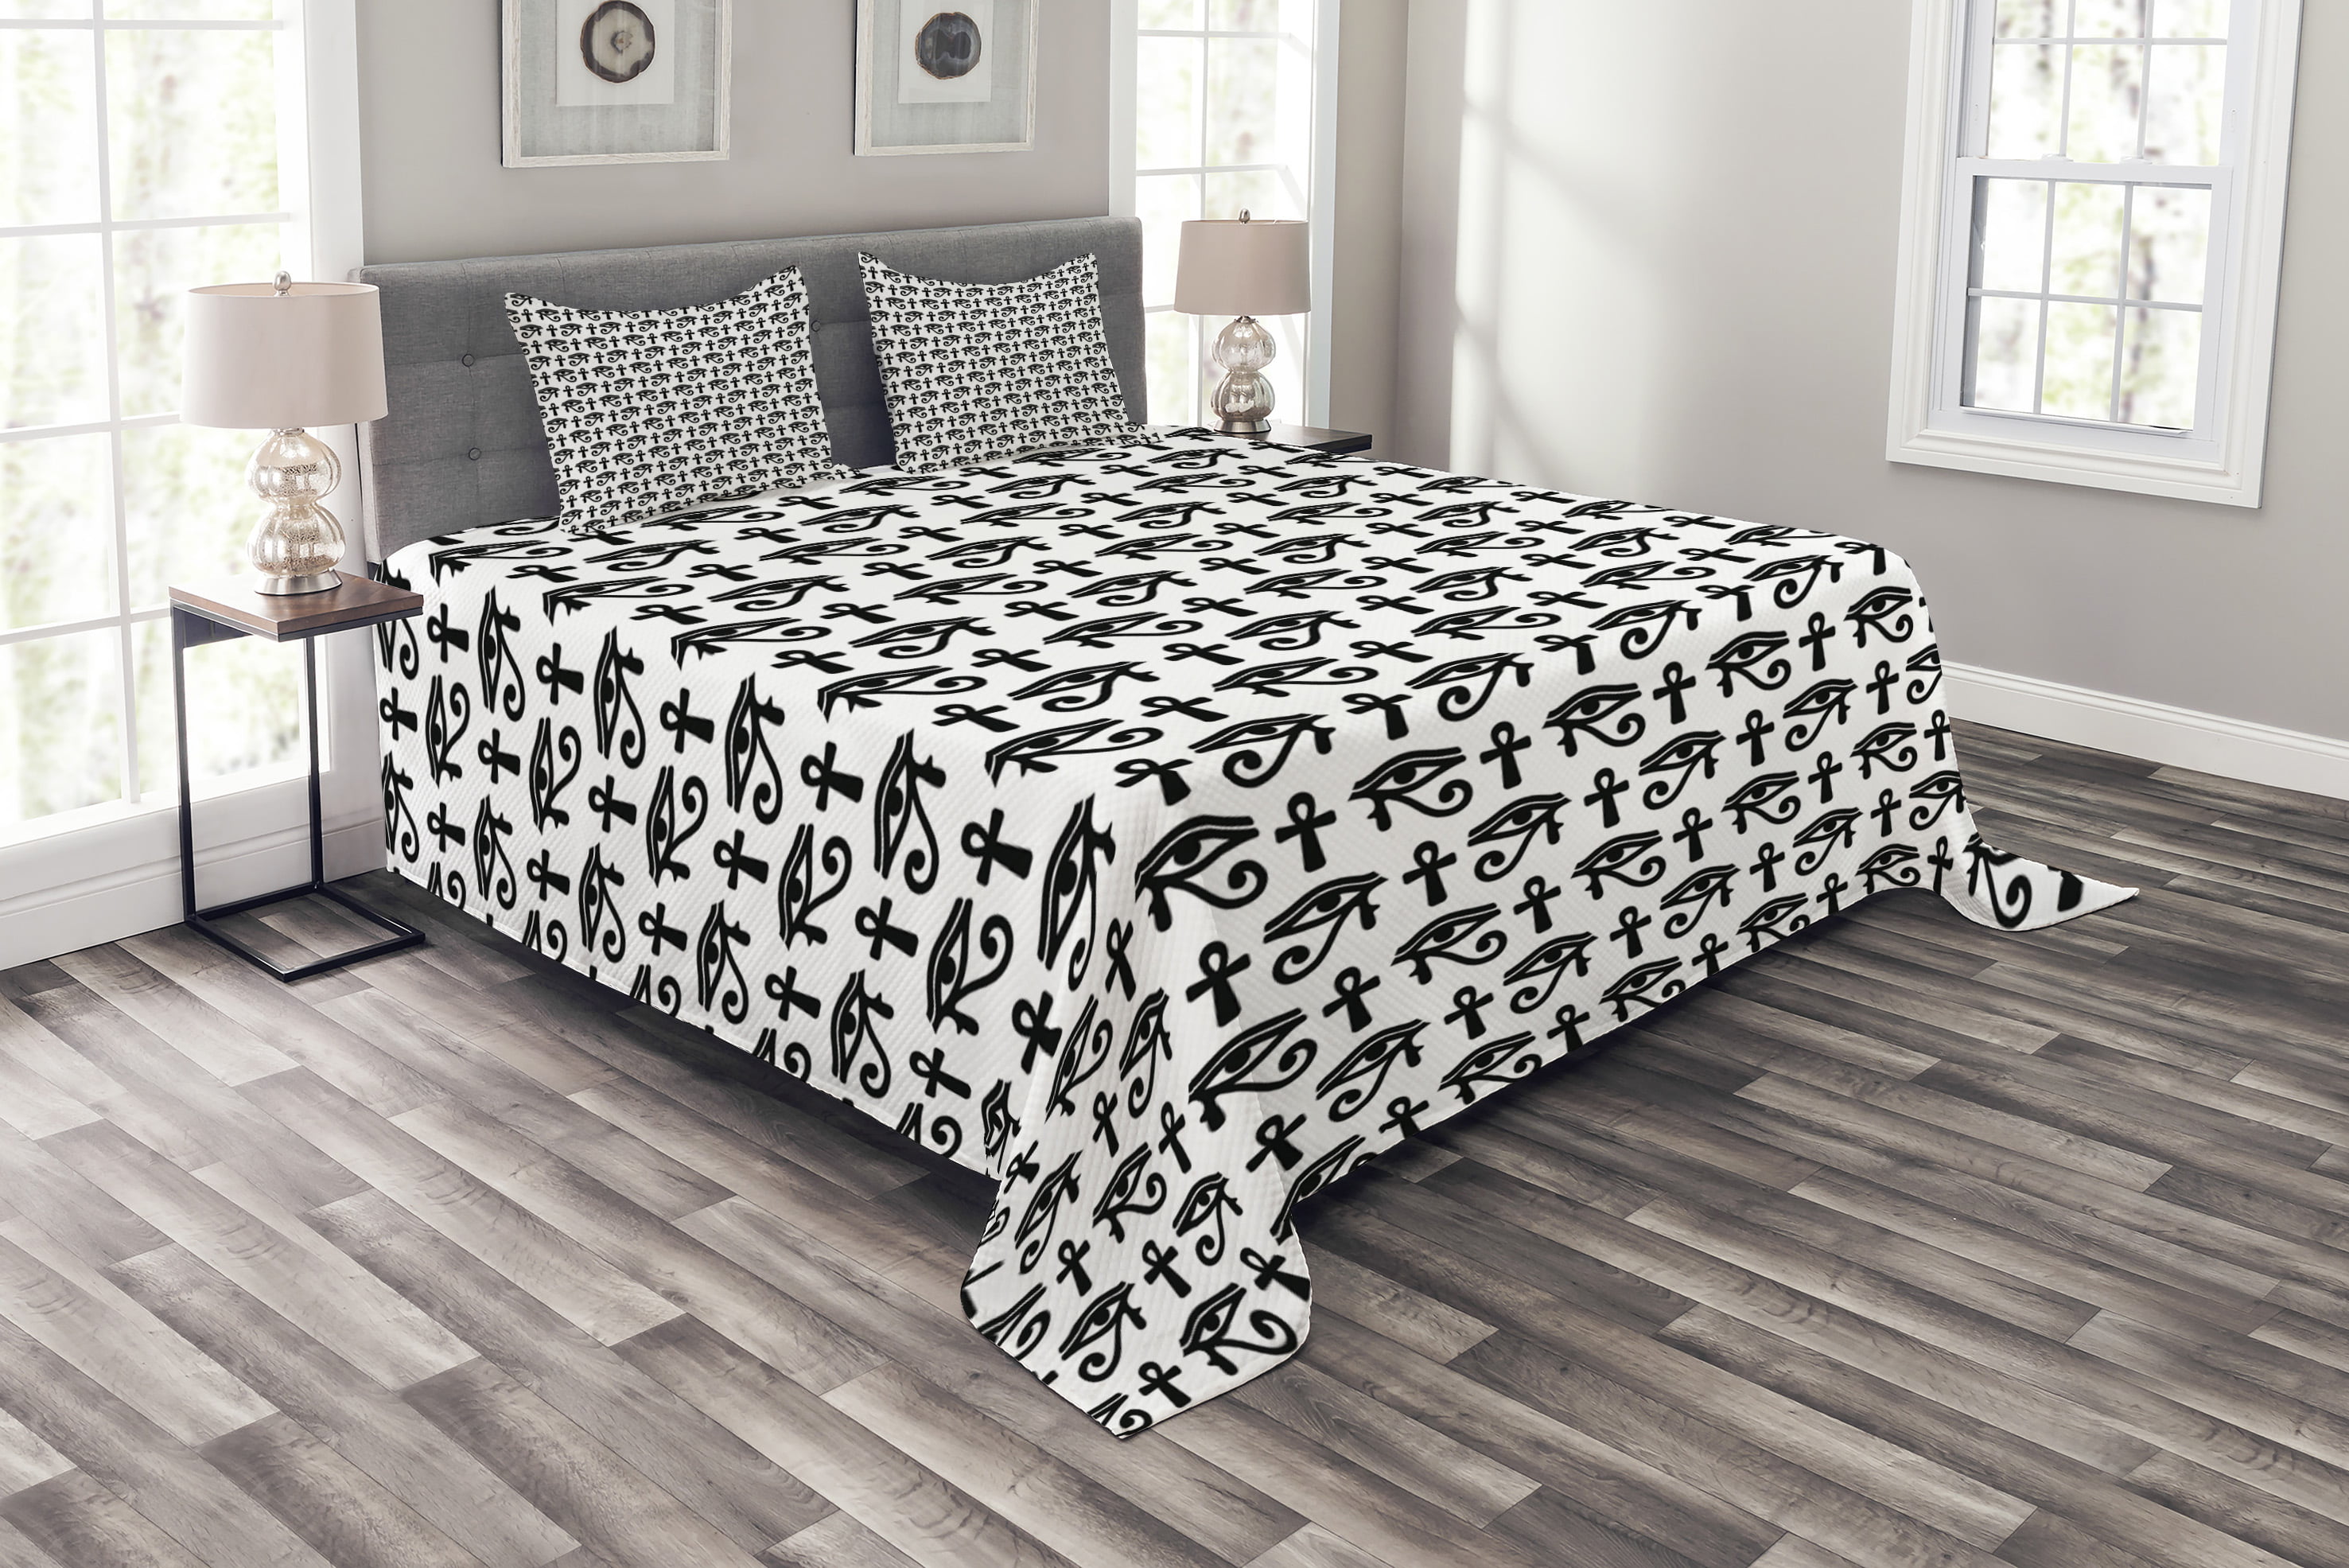 QUILTED EGYPTIAN COTTON BEDSPREAD BED THROW WITH 2 PILLOWSHAMS AND 2 CUSHIONS FITS DOUBLE AND KING SIZE BED BLACK